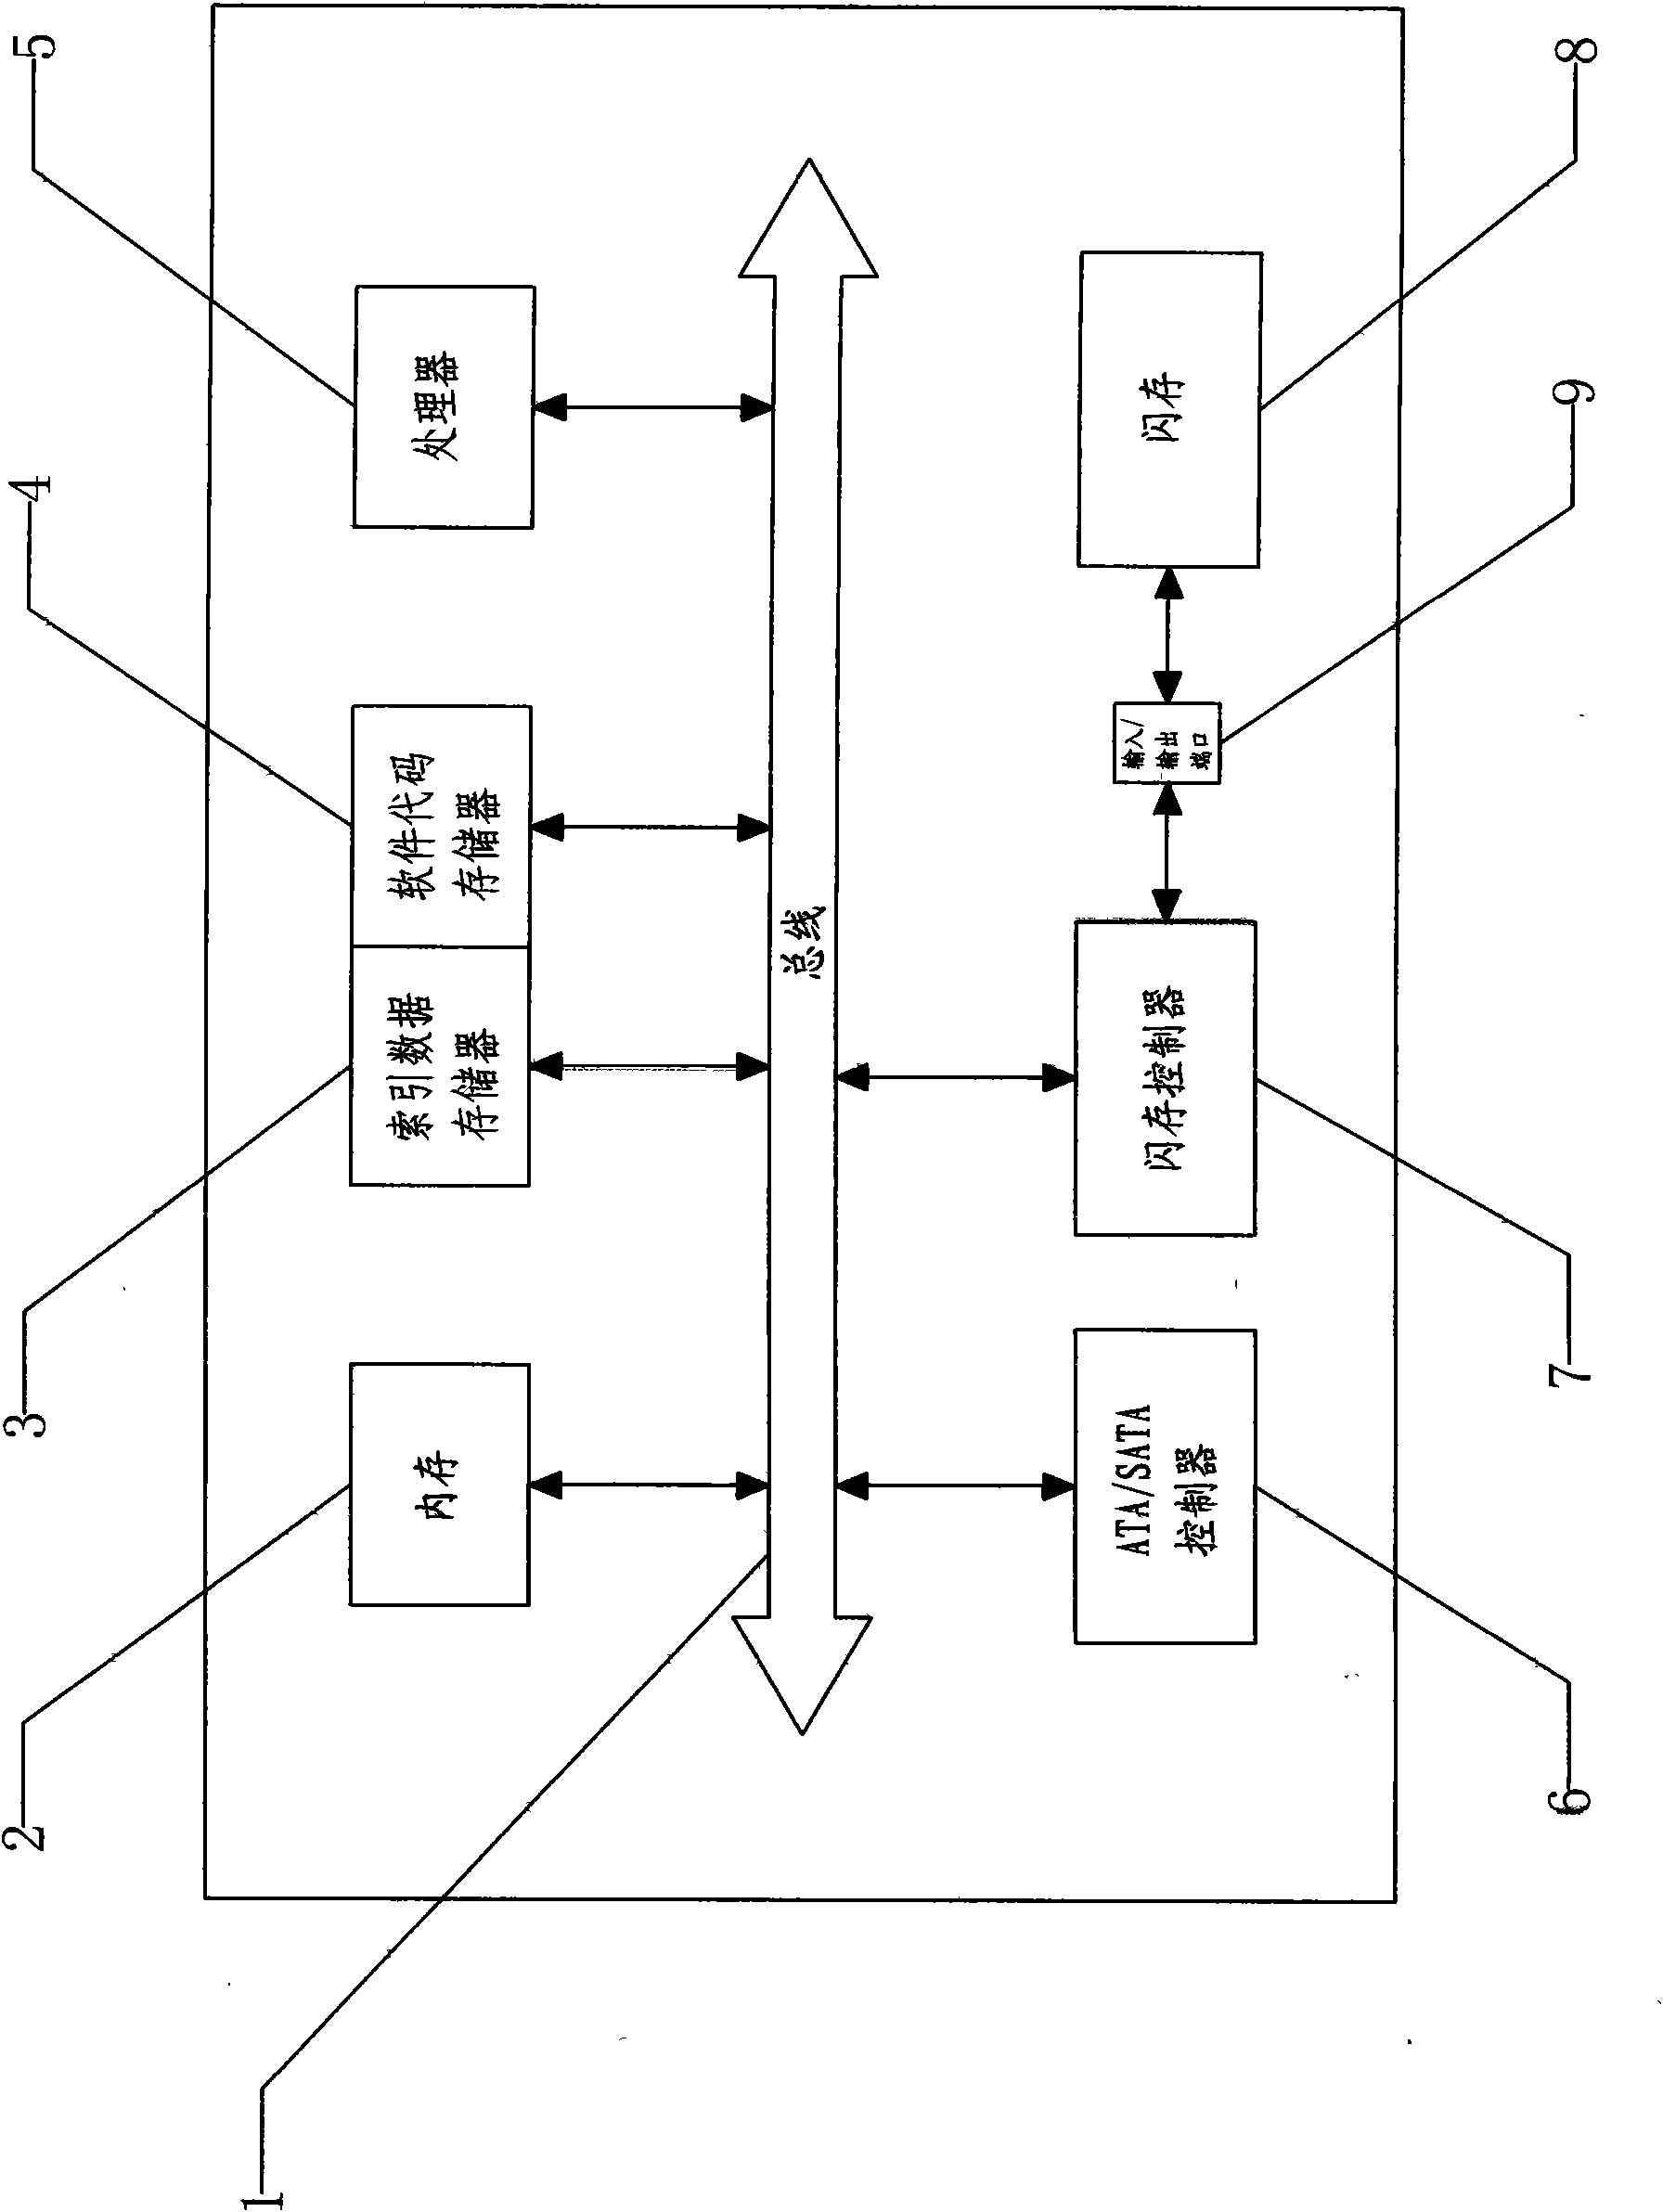 Structure of solid state disk and method for accelerating initialization thereof